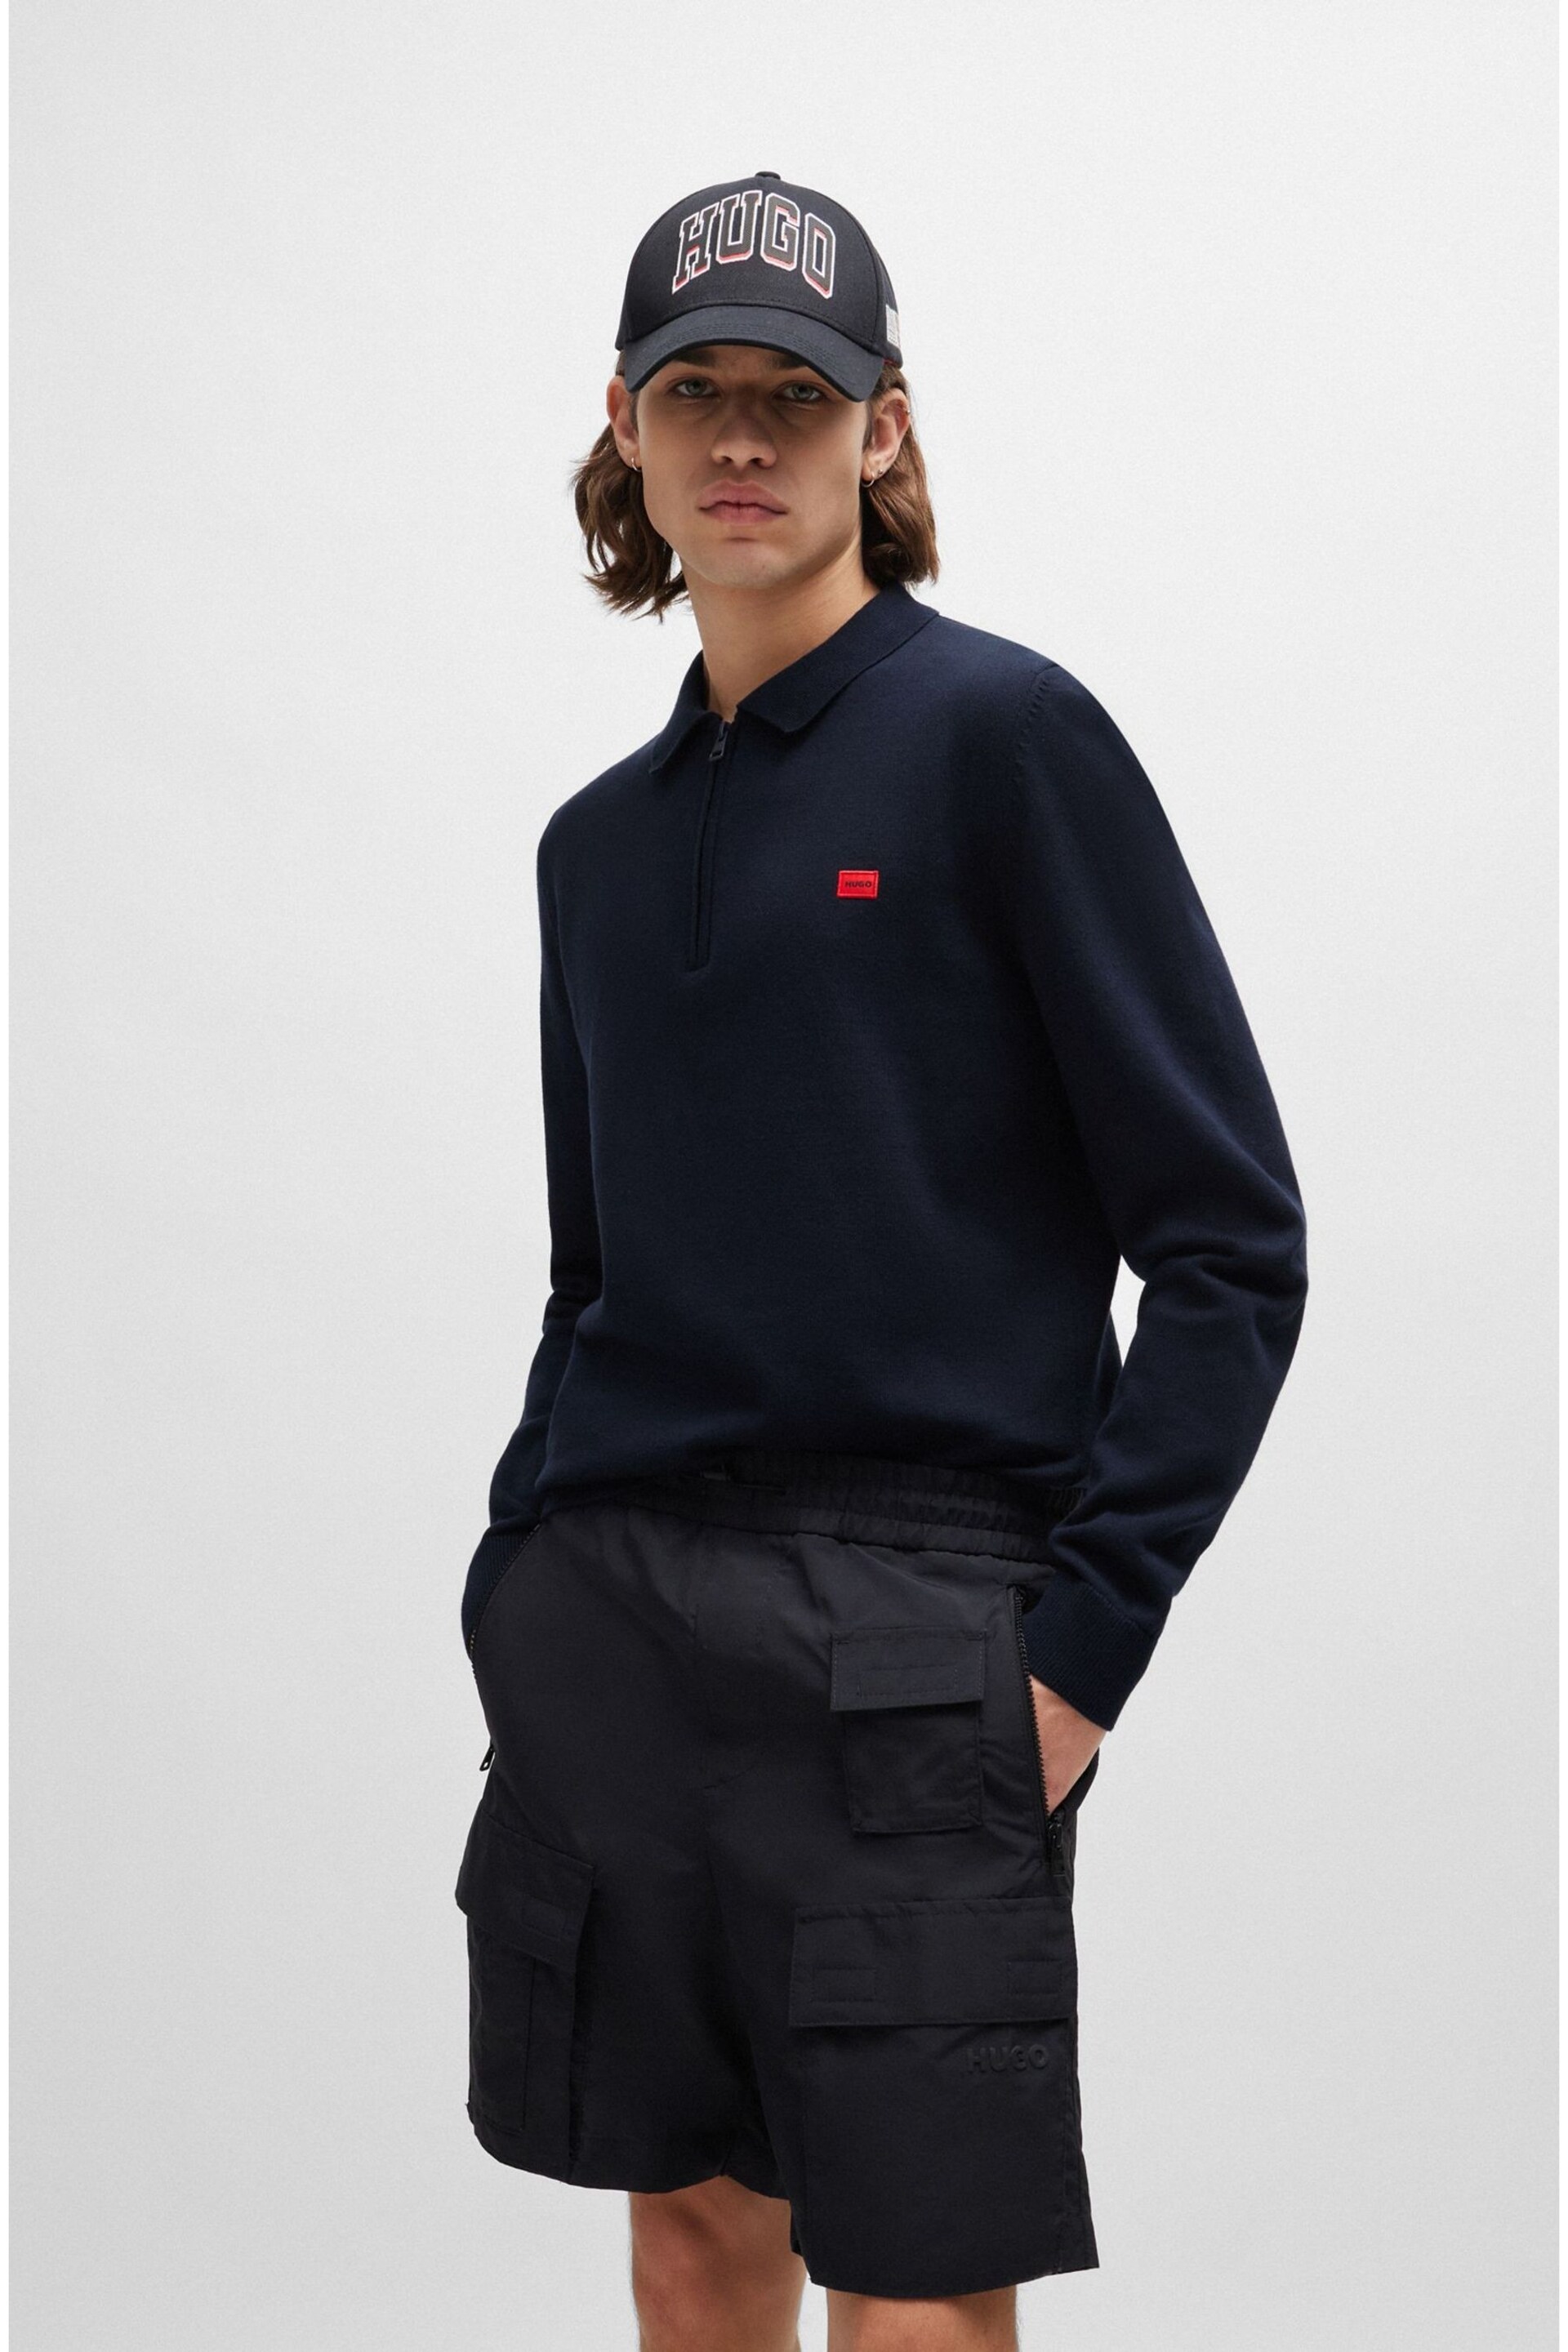 HUGO Blue Zip-Neck Cotton Sweater With Red Logo Label - Image 2 of 3